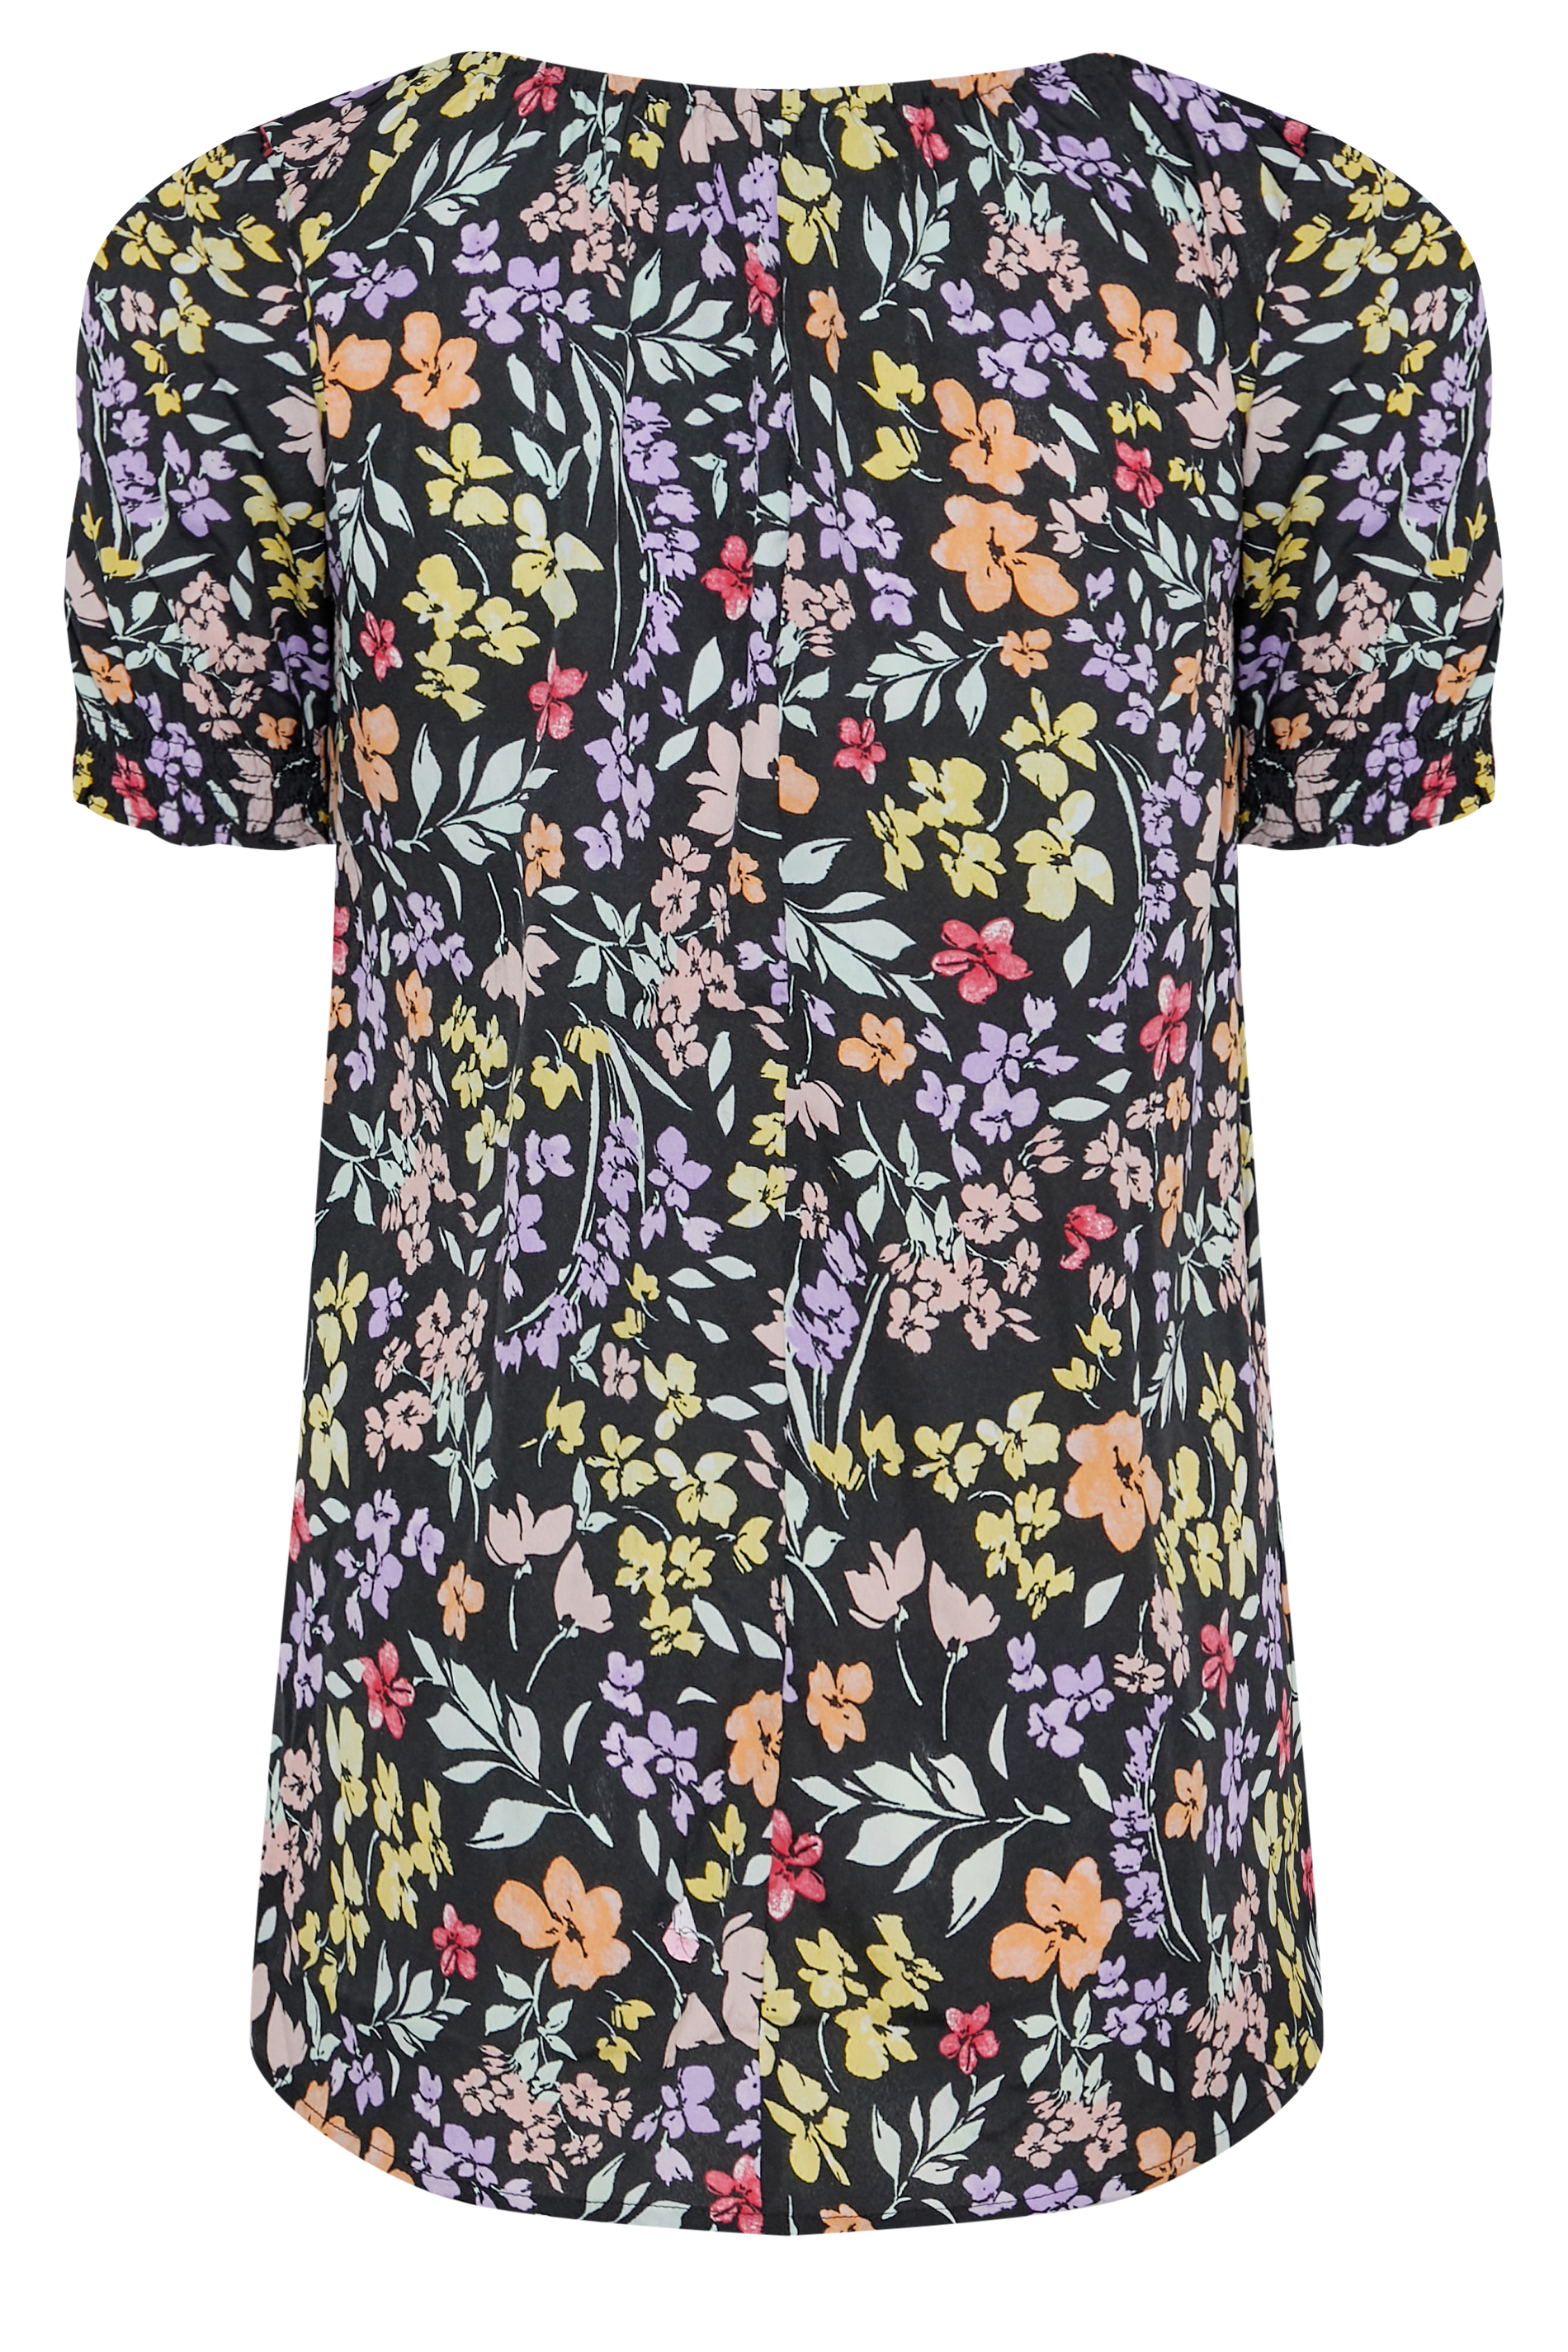 Grande taille  Tops Grande taille  Tops Bohèmes | Curve Black Floral Print Gypsy Top - PK95901